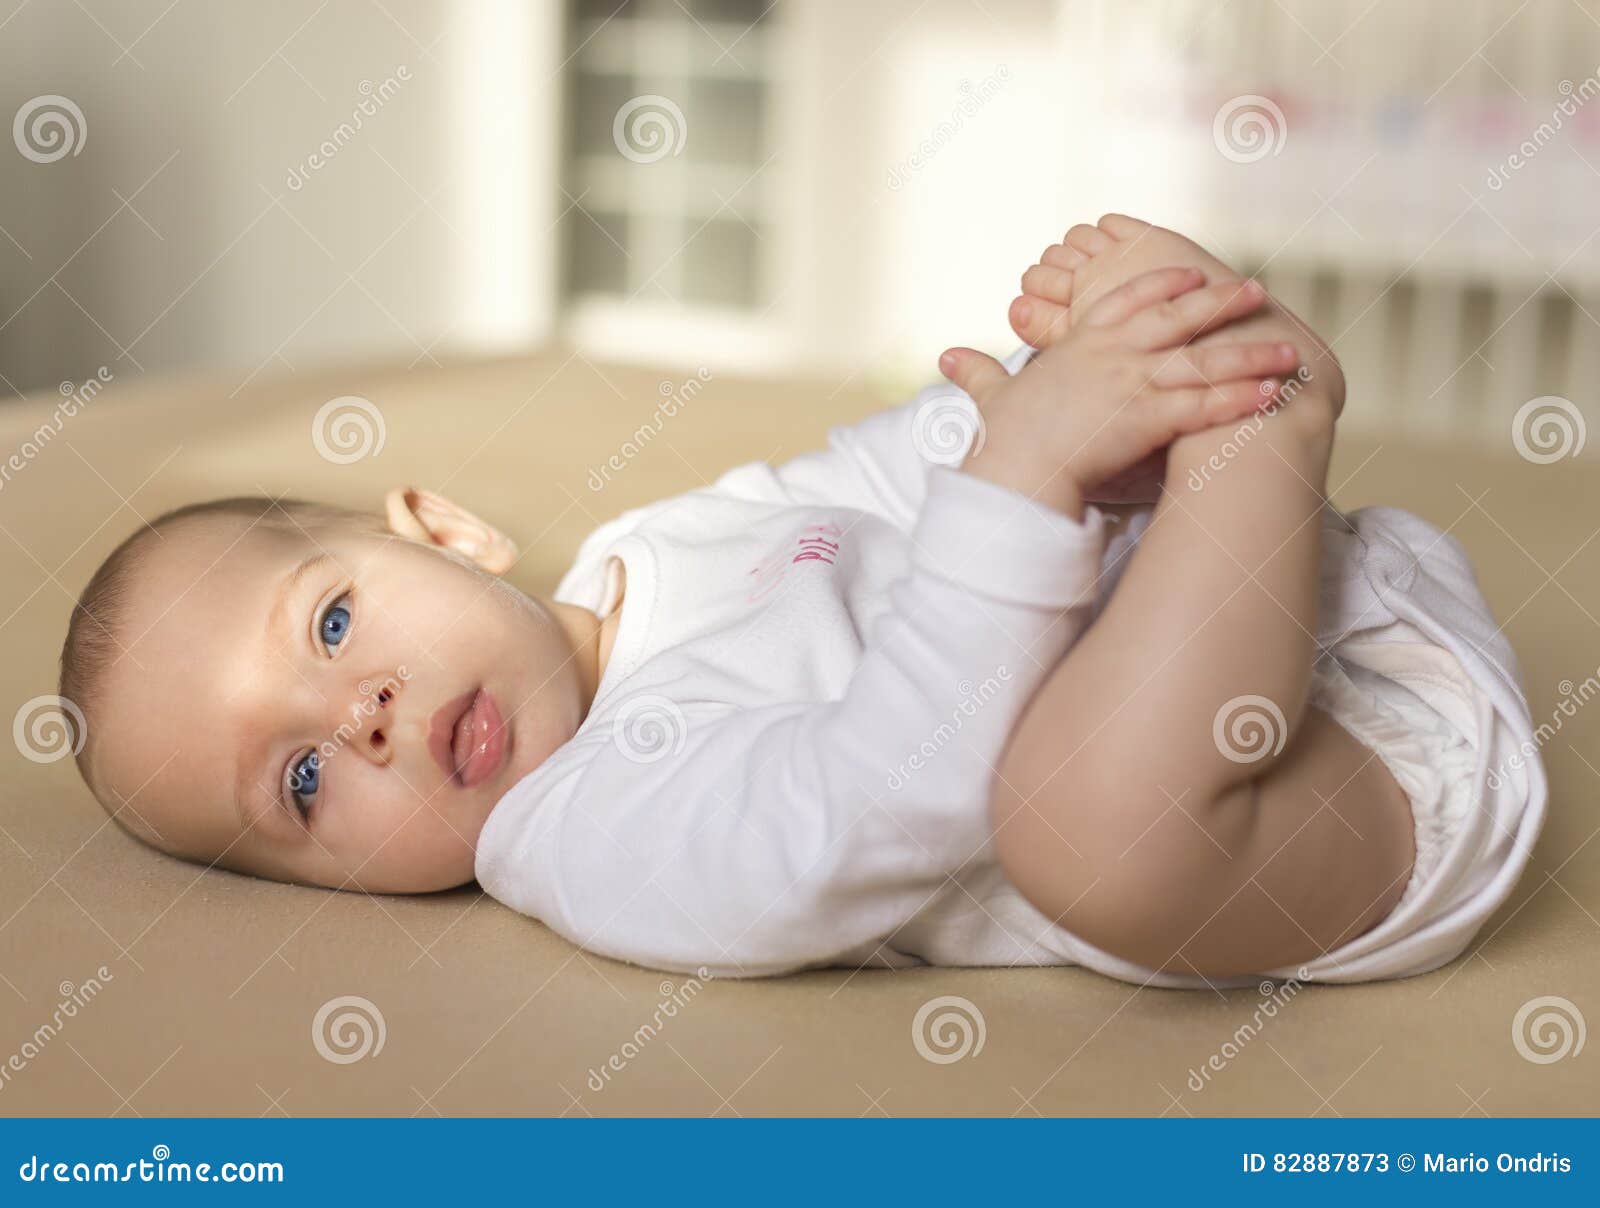 Happy Baby Playing With Feet Stock Image - Image of infant ...